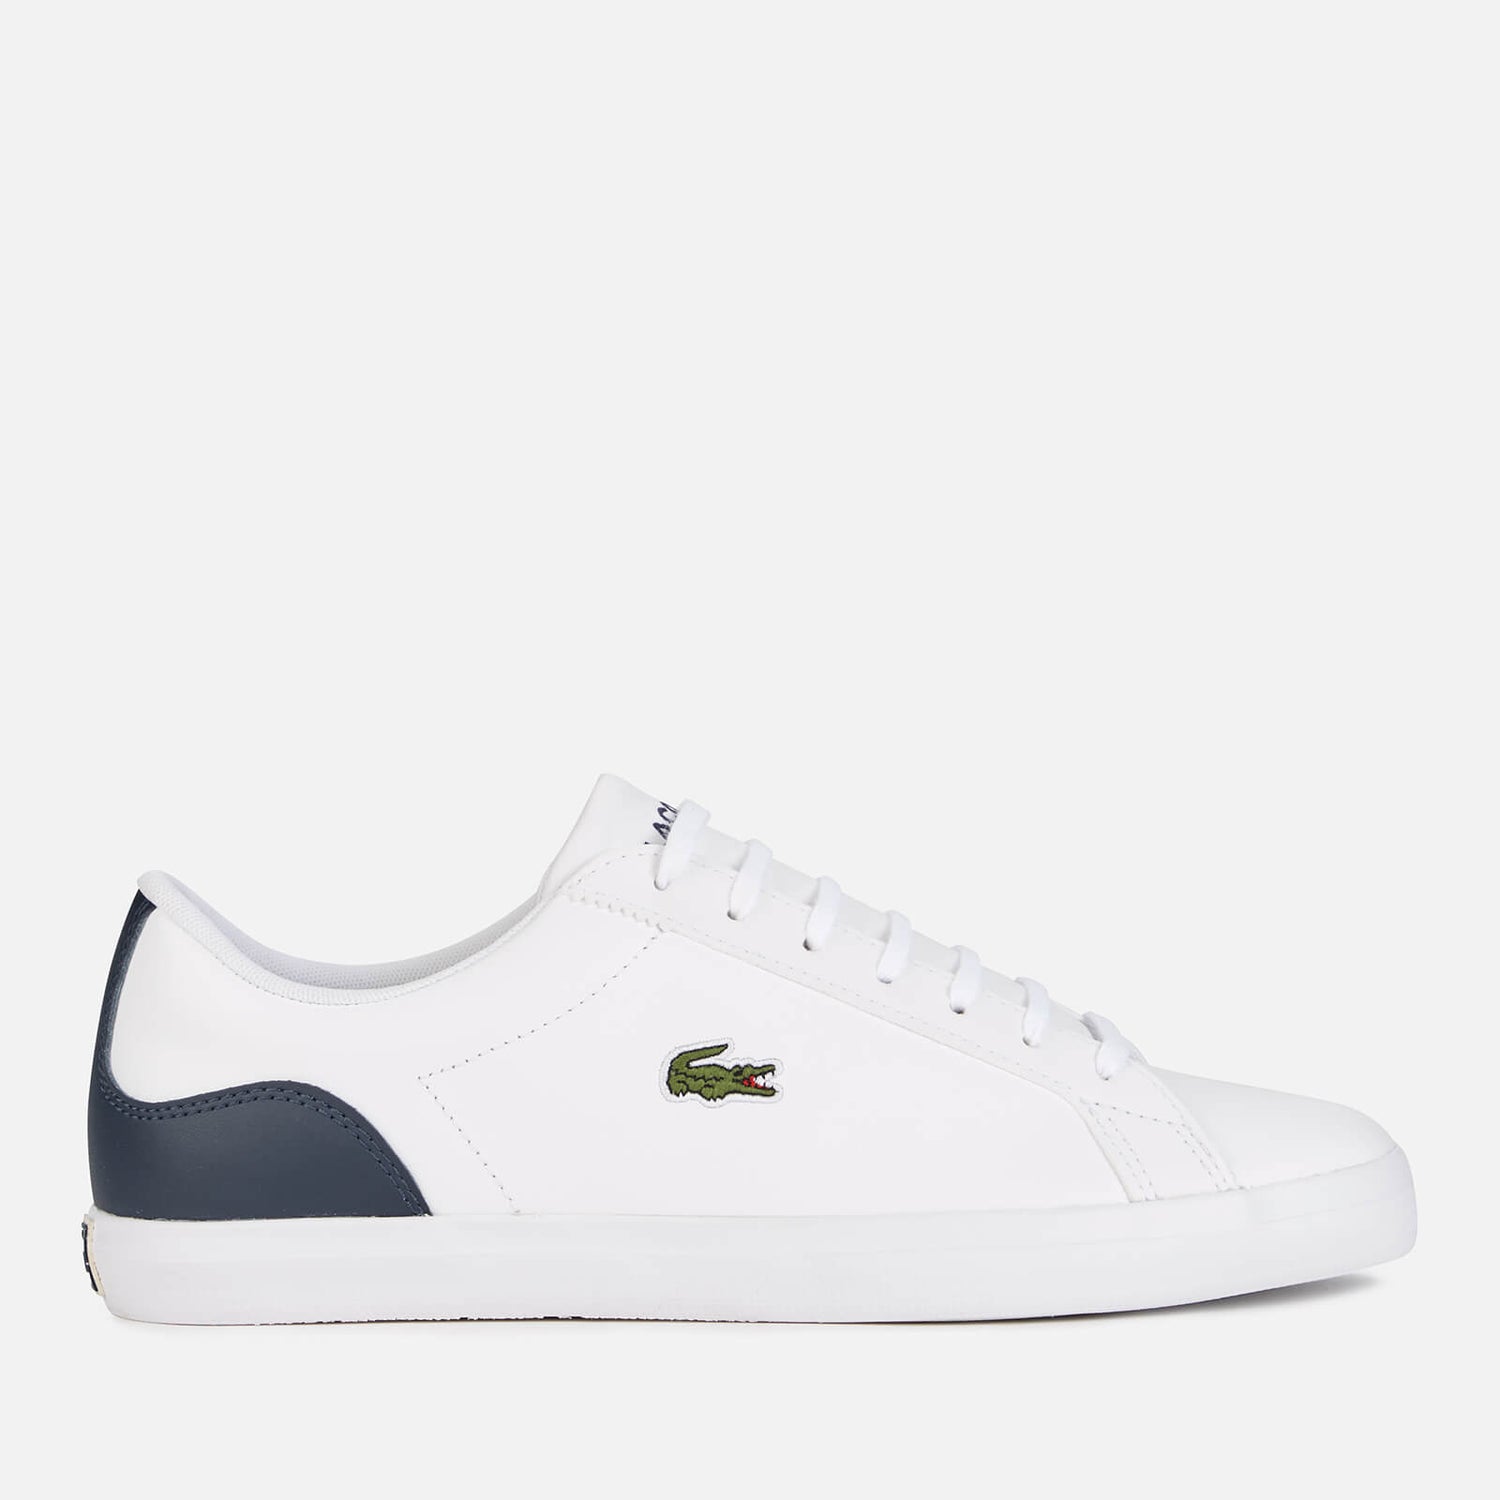 Lacoste Men's Lerond Bl21 1 Leather Vulcanised Trainers - White/Navy